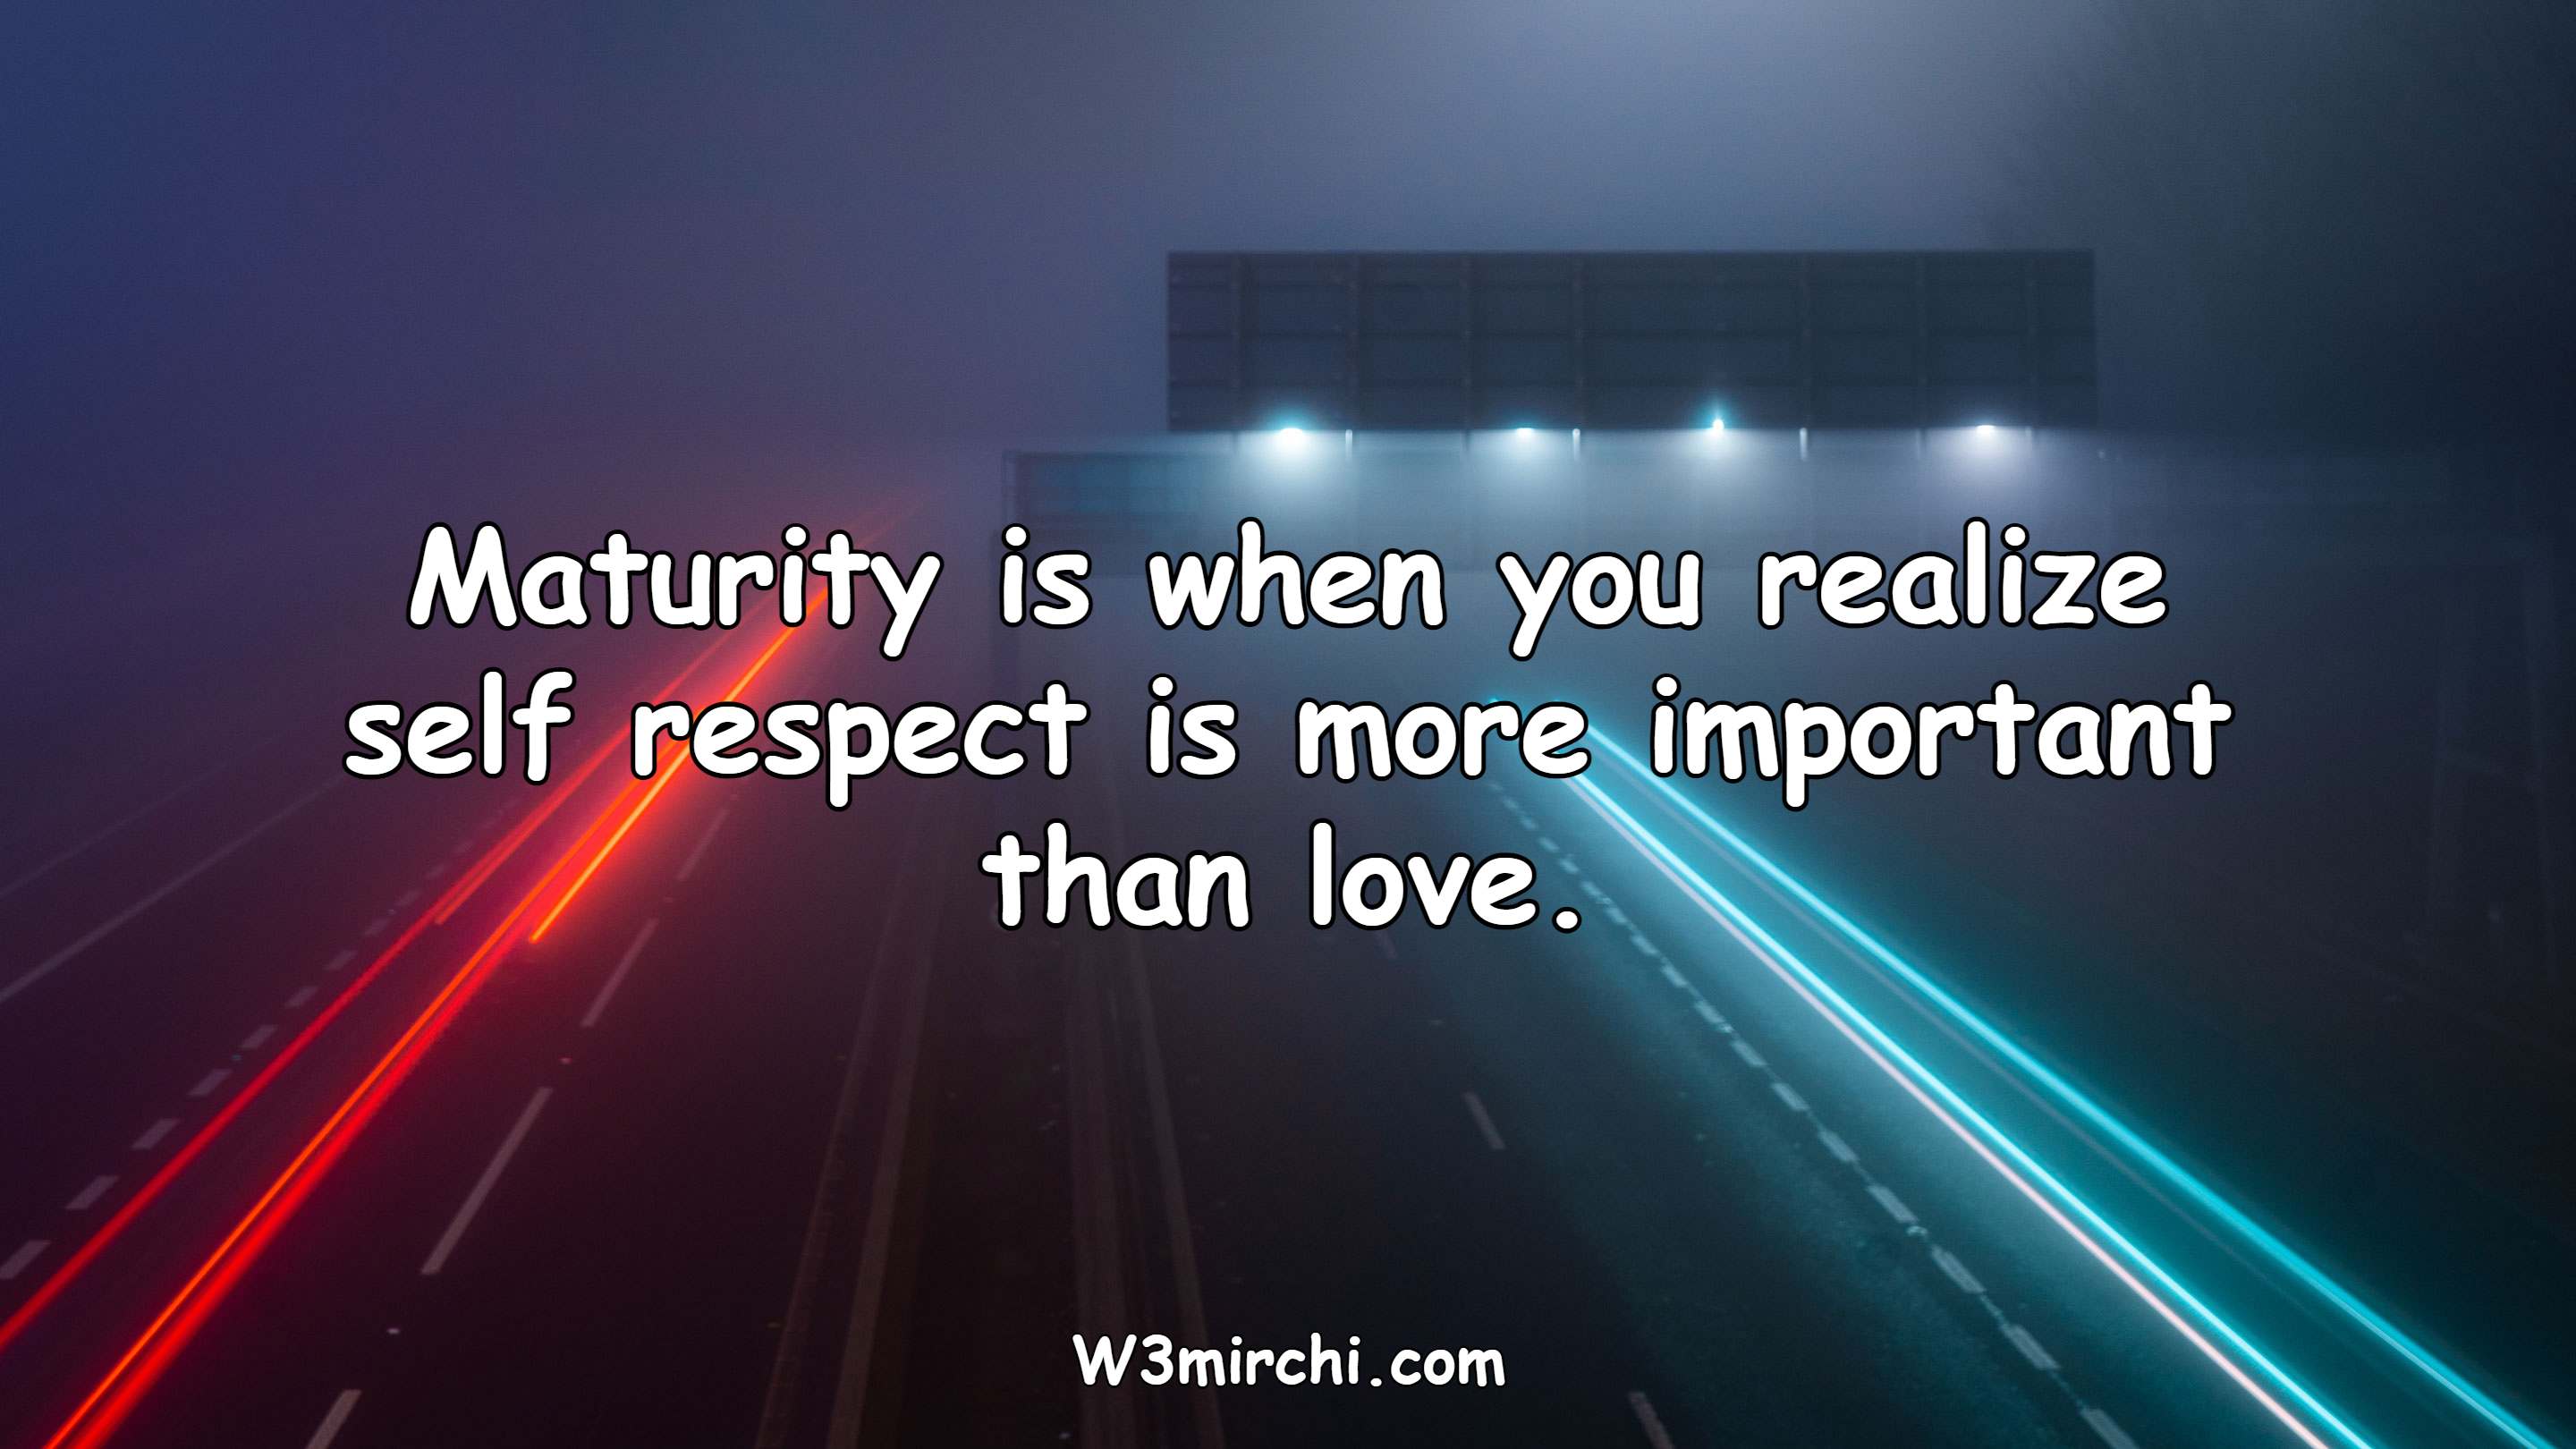 Maturity is when you realize self